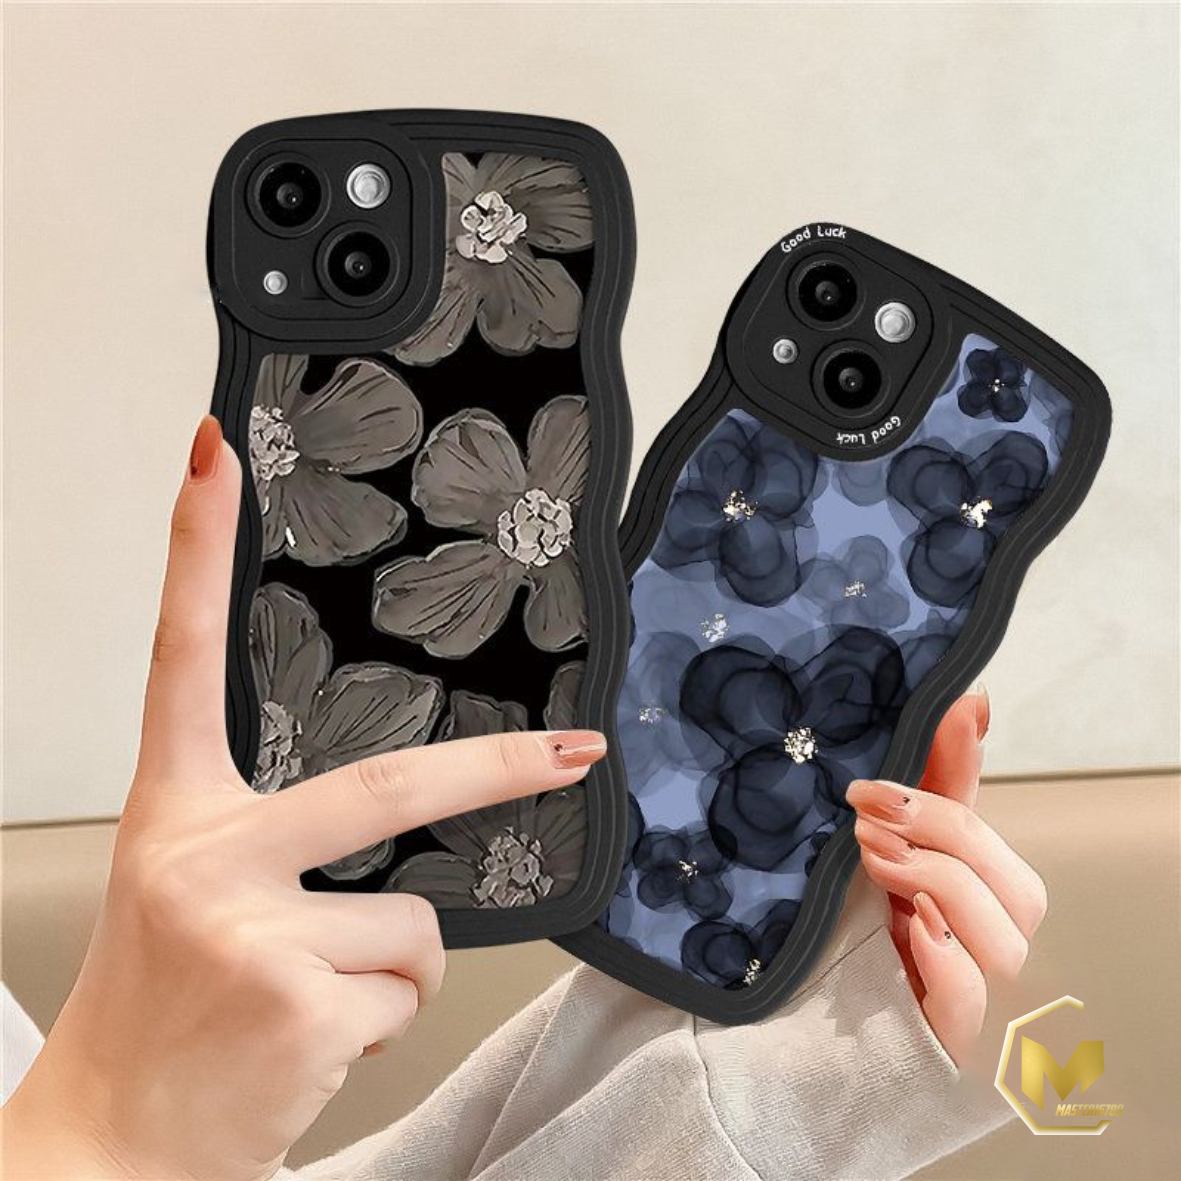 SS820 CASE SILIKON CASING OIL PAINTING FLOWER FOR XIAOMI REDMI 5 12 A1 A2 PLUS 4A 4X 5A 6 6A 8 8A PRO 9 M2 9A 9C 9T 10 NOTE 11E 10C C40 12C 11A POCO M3 X5 NOTE 12 5G INDO MA4461